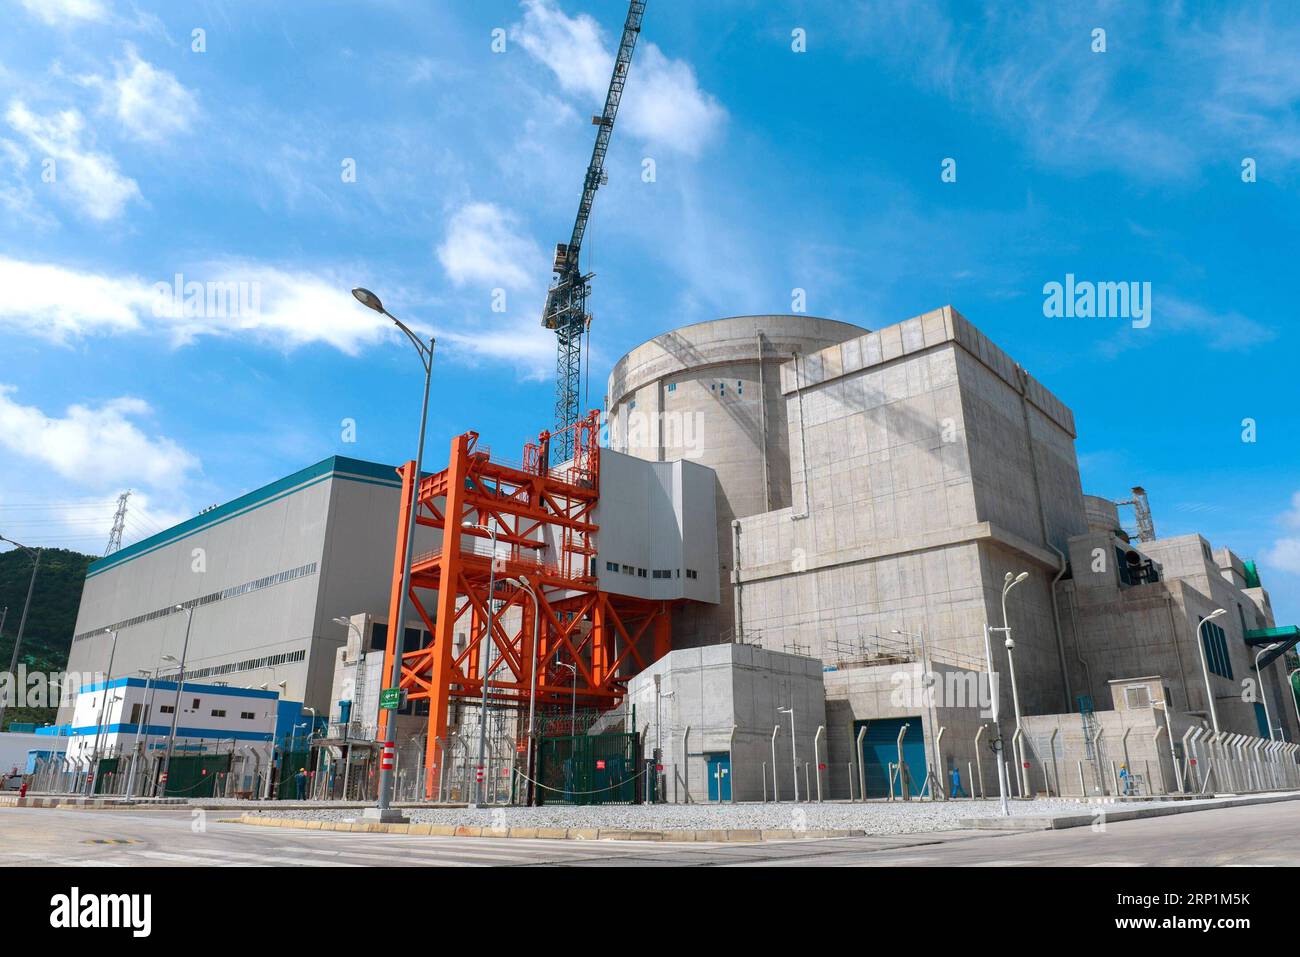 (180713) -- GUANGZHOU, July 13, 2018 -- Photo taken on June 29, 2018 shows the exterior of the fifth unit of the Yangjiang nuclear power plant in Yangjiang, south China s Guangdong Province. The fifth unit of the Yangjiang nuclear power plant is ready for commercial operation, said China General Nuclear Power Corp. (CGN), the owner of the plant, on Friday. (lmm) CHINA-GUANGDONG-NUCLEAR POWER PLANT-UNIT-OPERATION (CN) ChenxJi PUBLICATIONxNOTxINxCHN Stock Photo